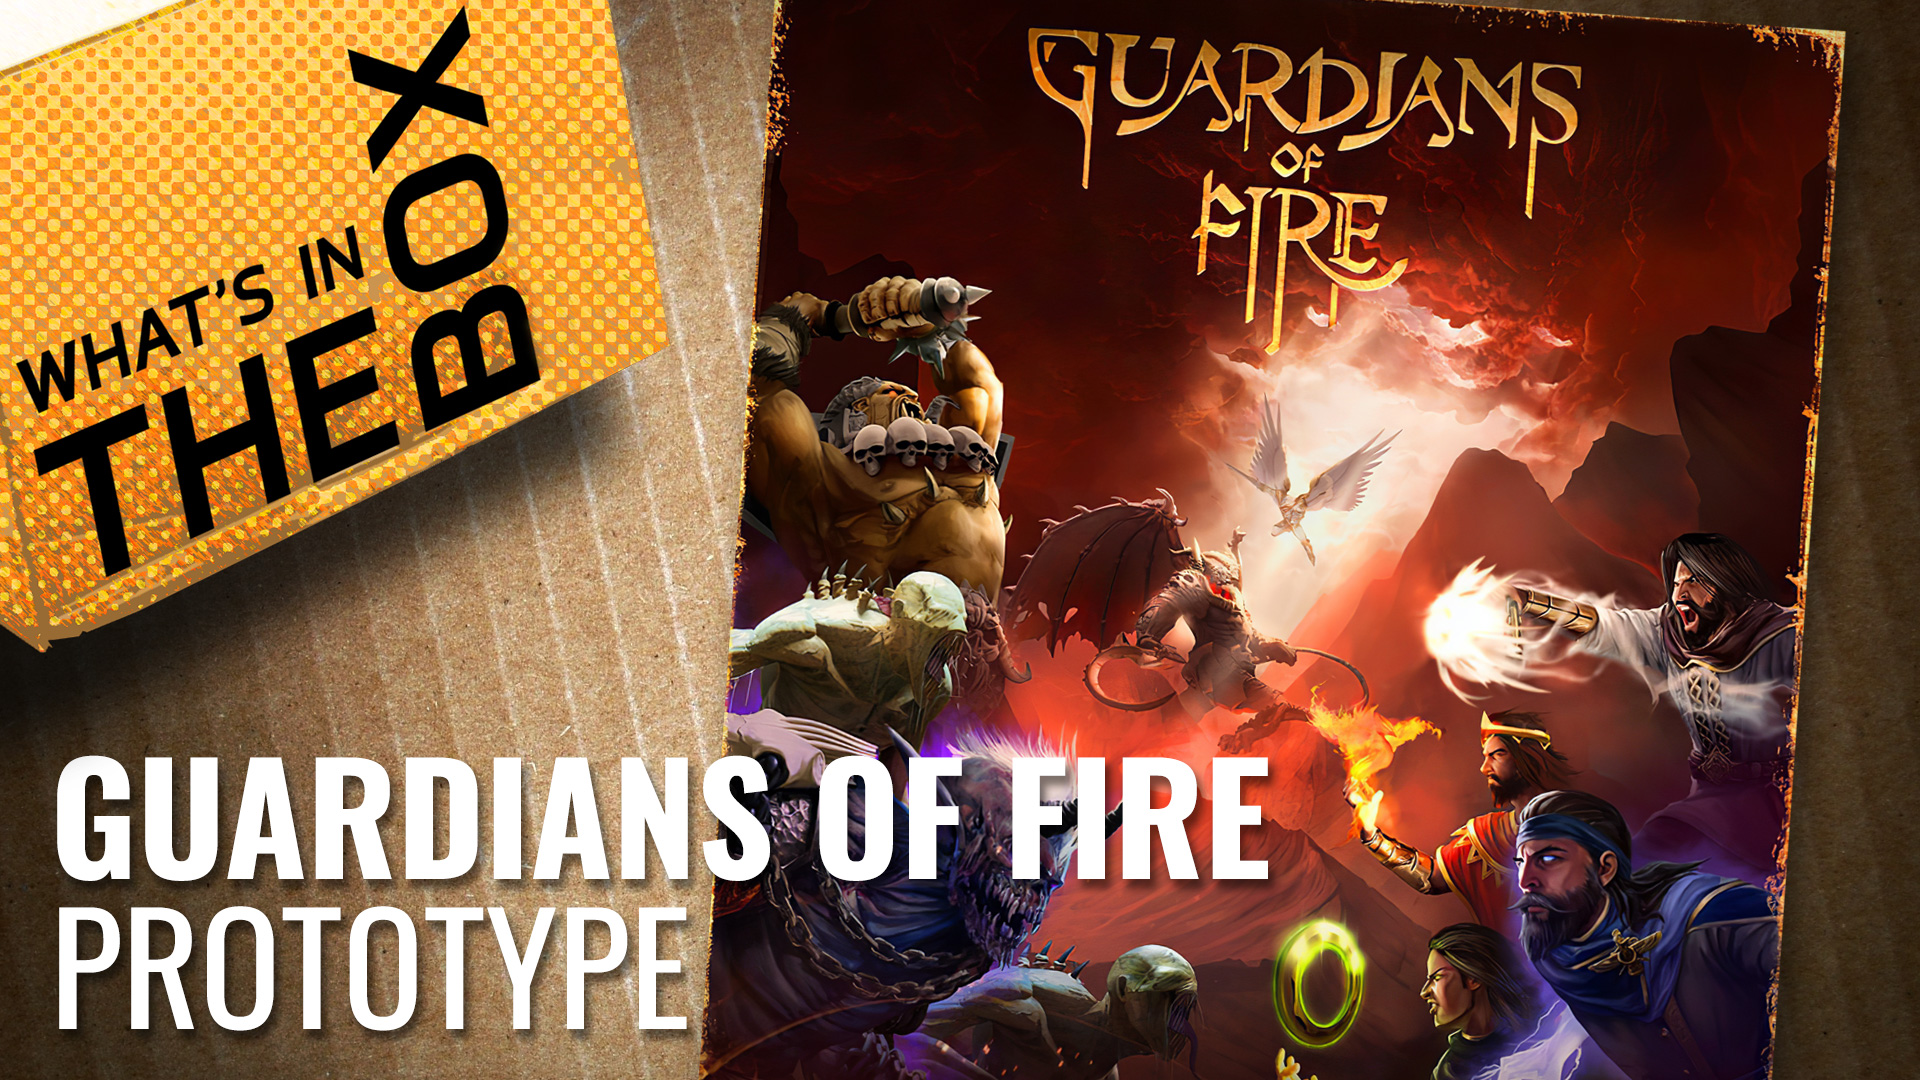 Guardians-of-fire-coverimage